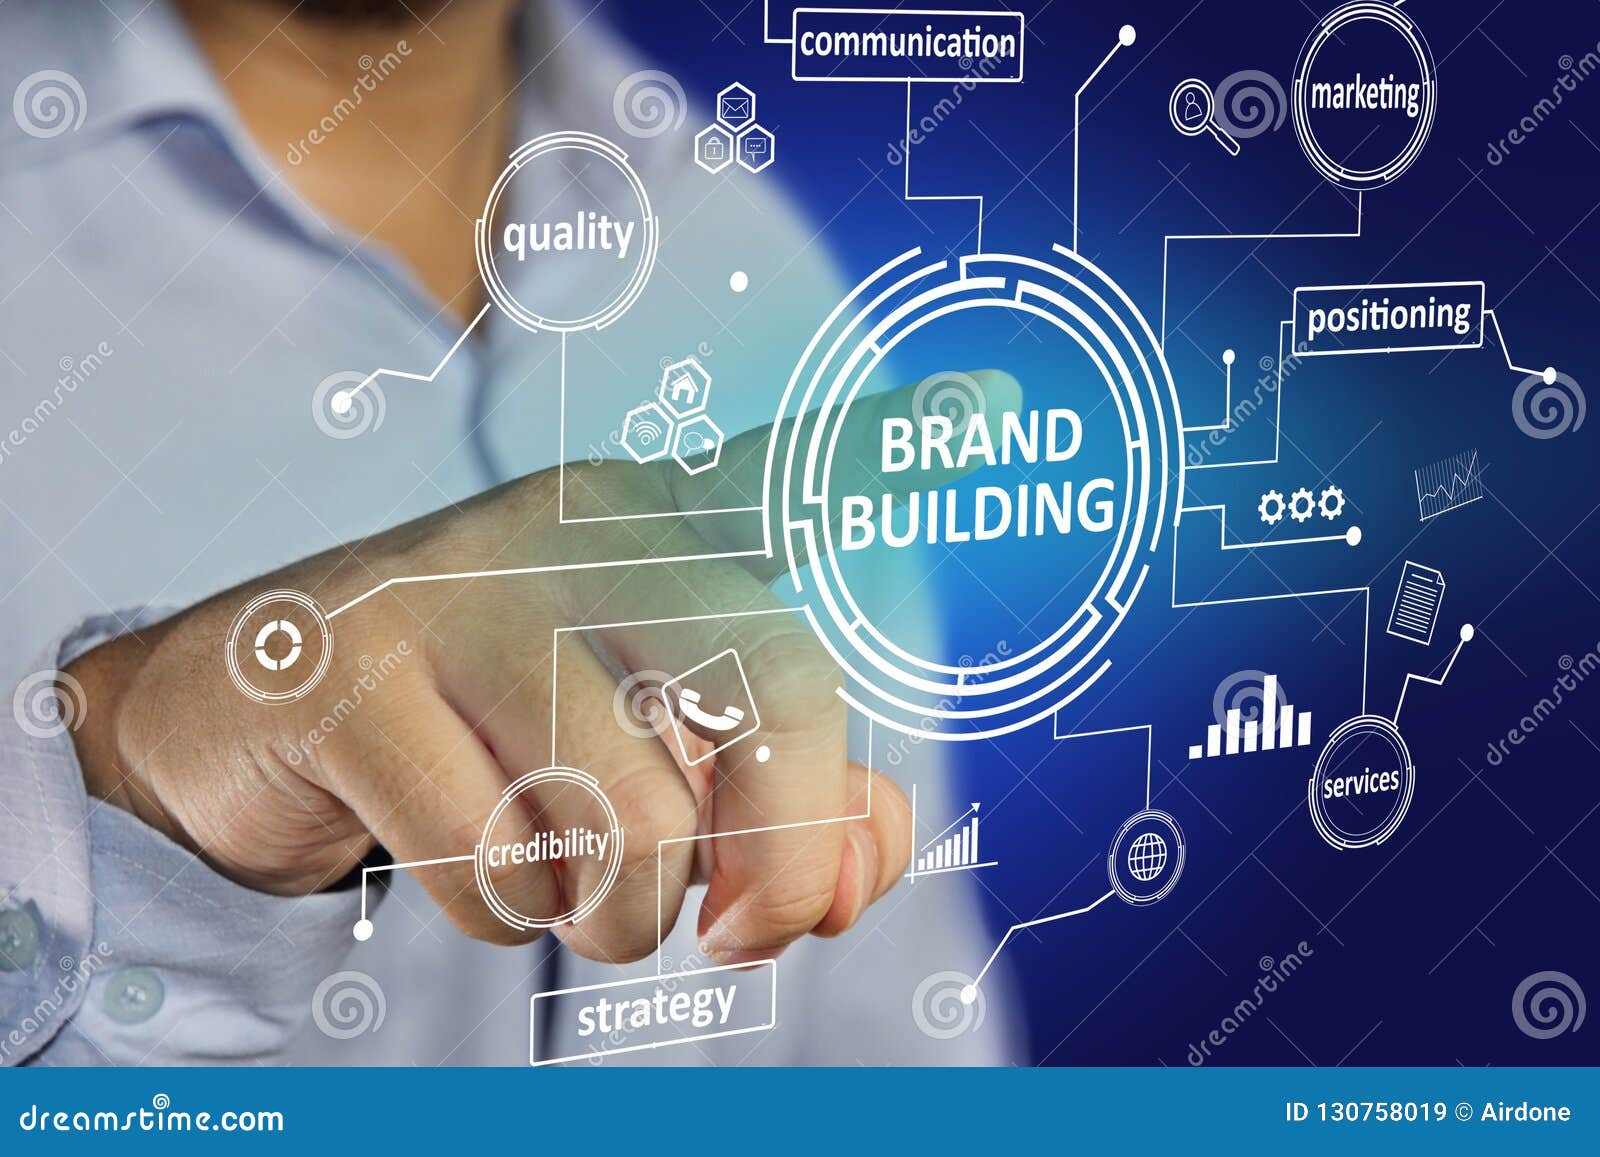 brand building, business marketing words quotes concept